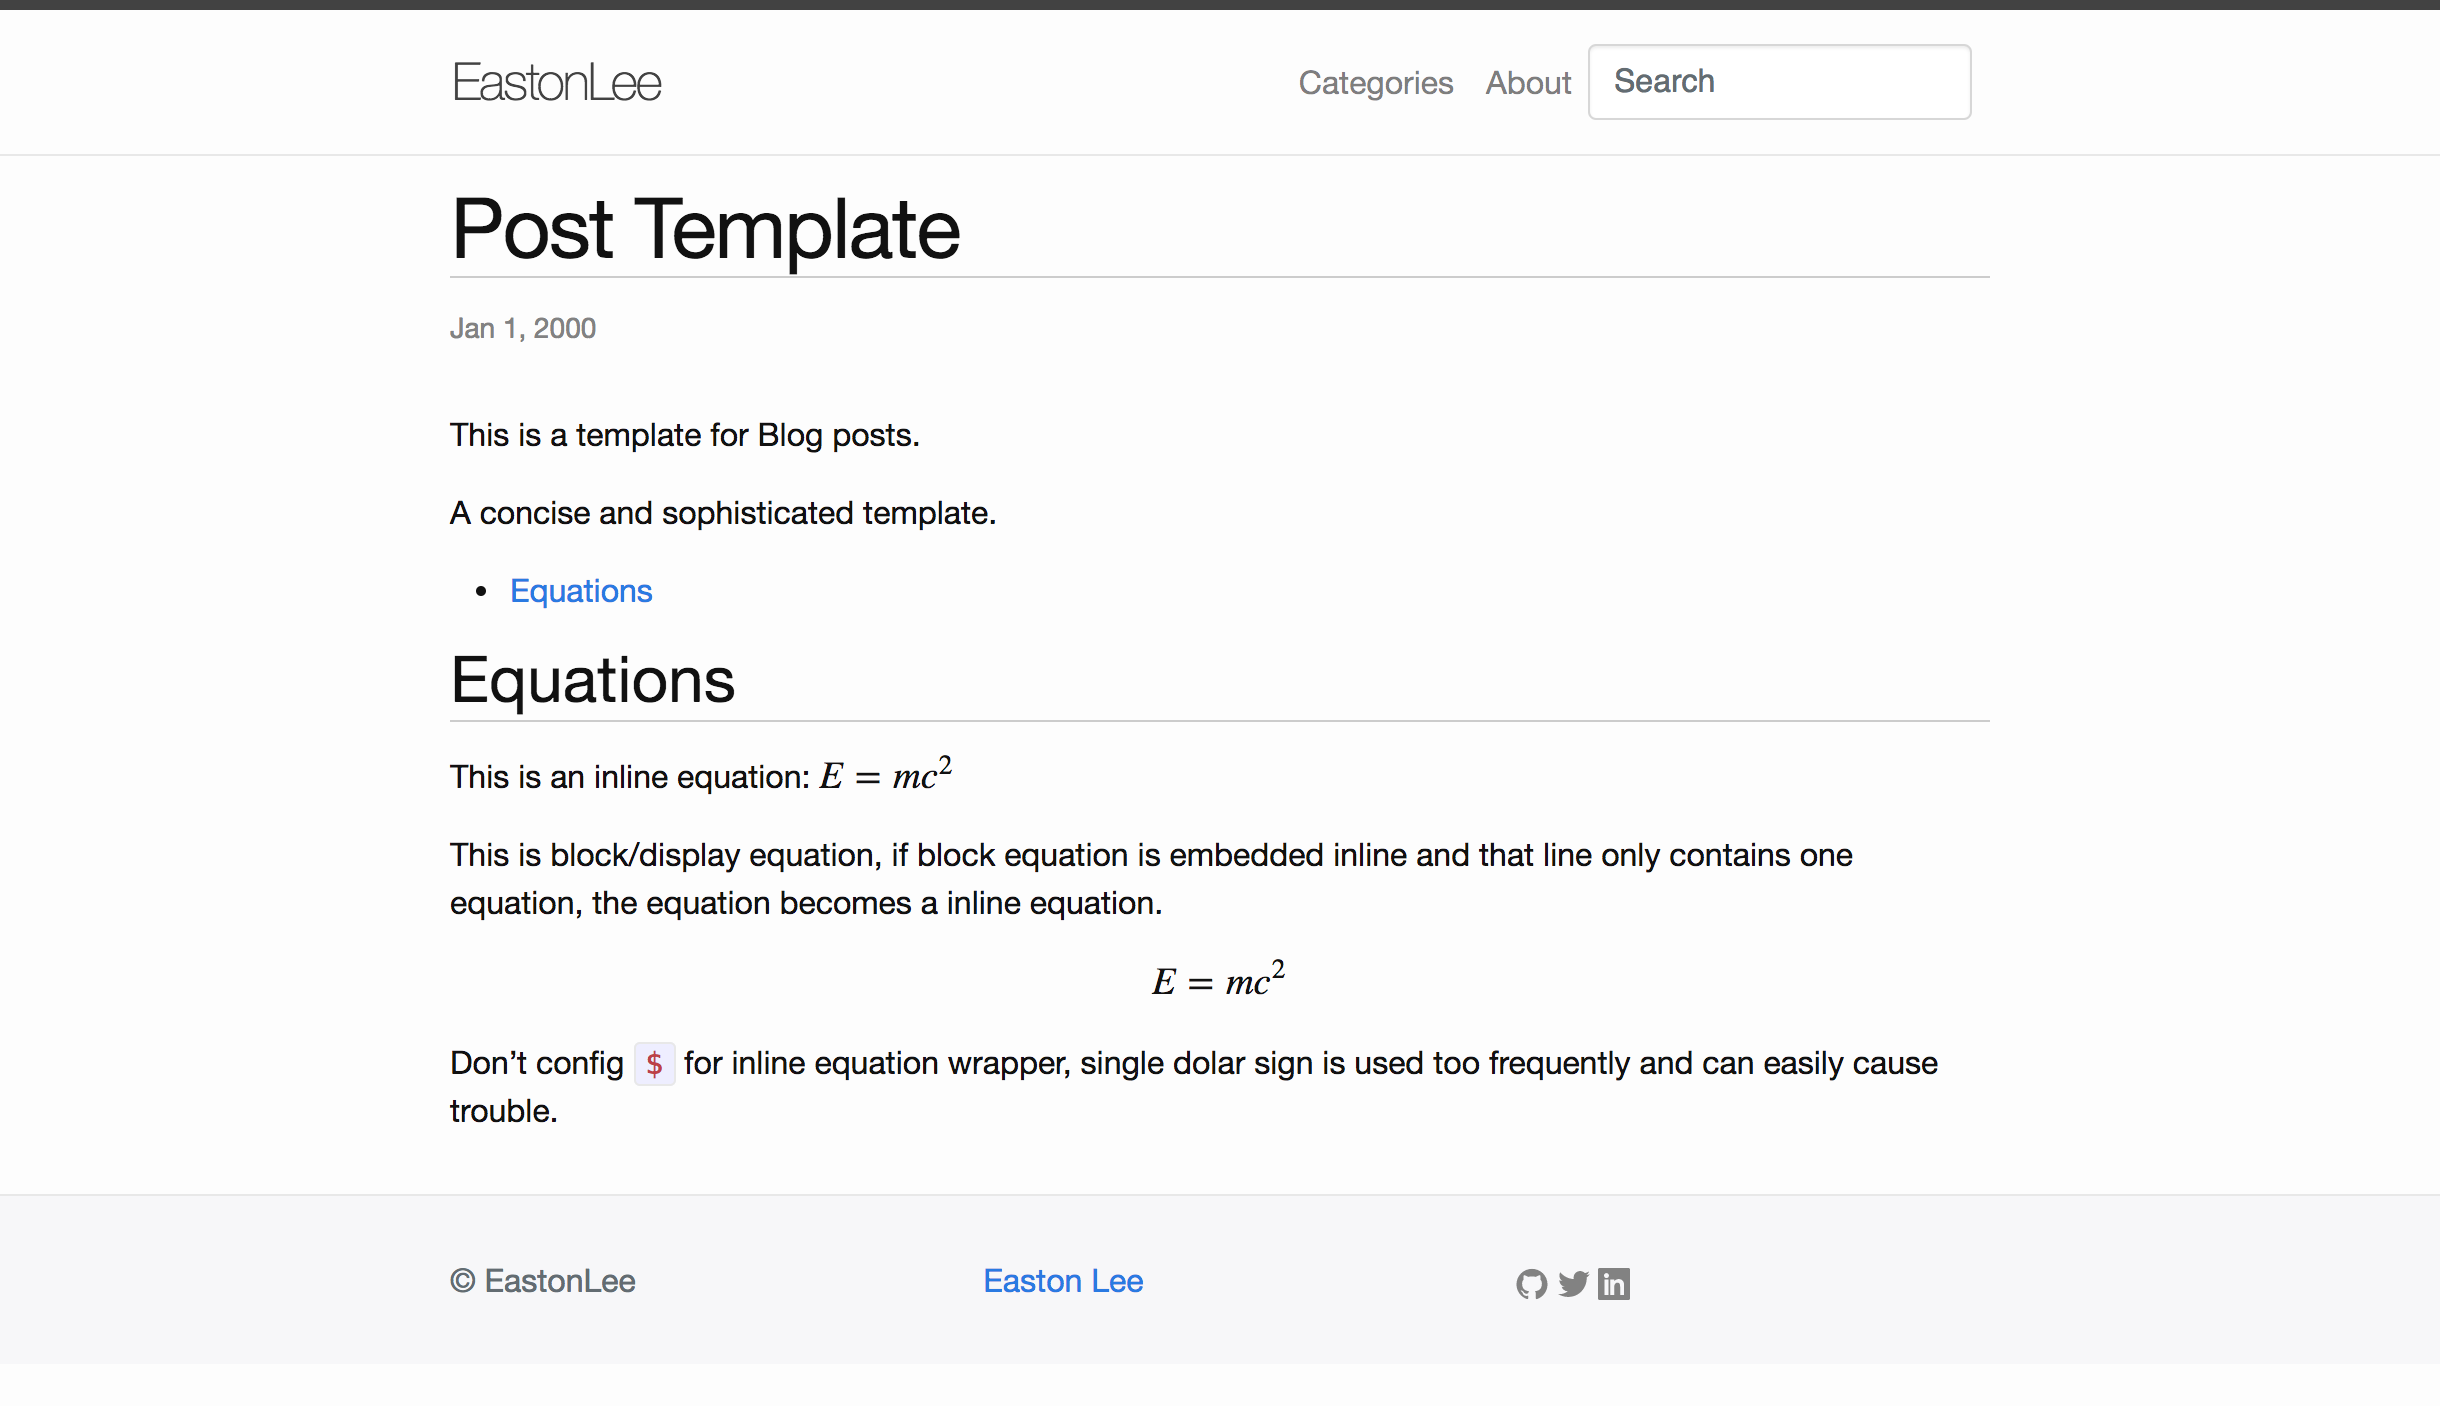 The Post Template in Jekyll-BootStrap4-Minima